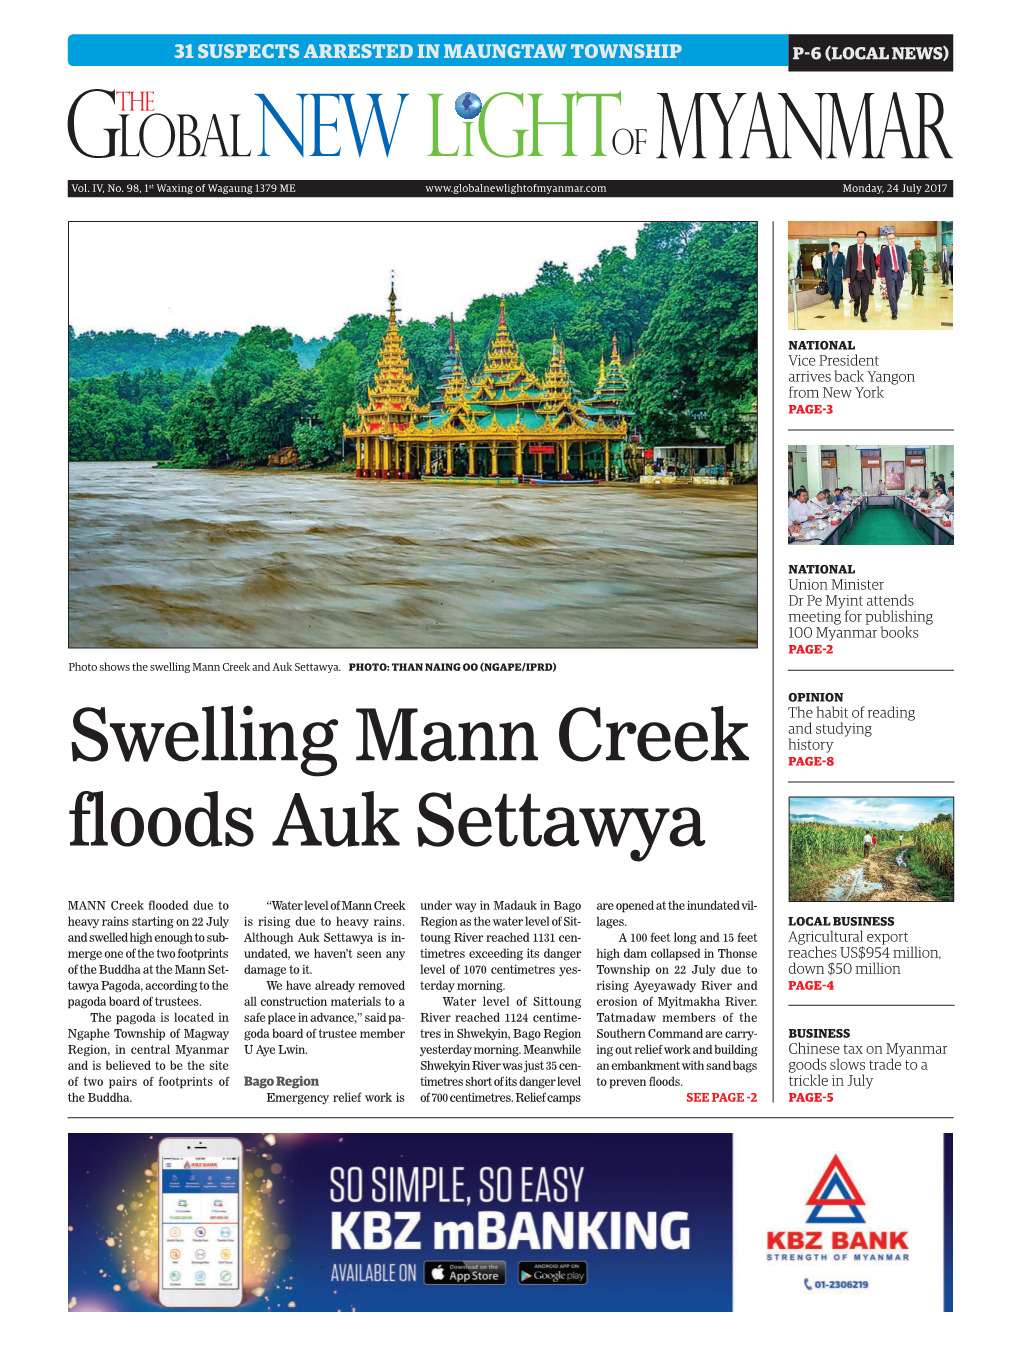 Swelling Mann Creek Floods Auk Settawya Flood Victims in Kyaikto from Page-1 Creeks Are Raging